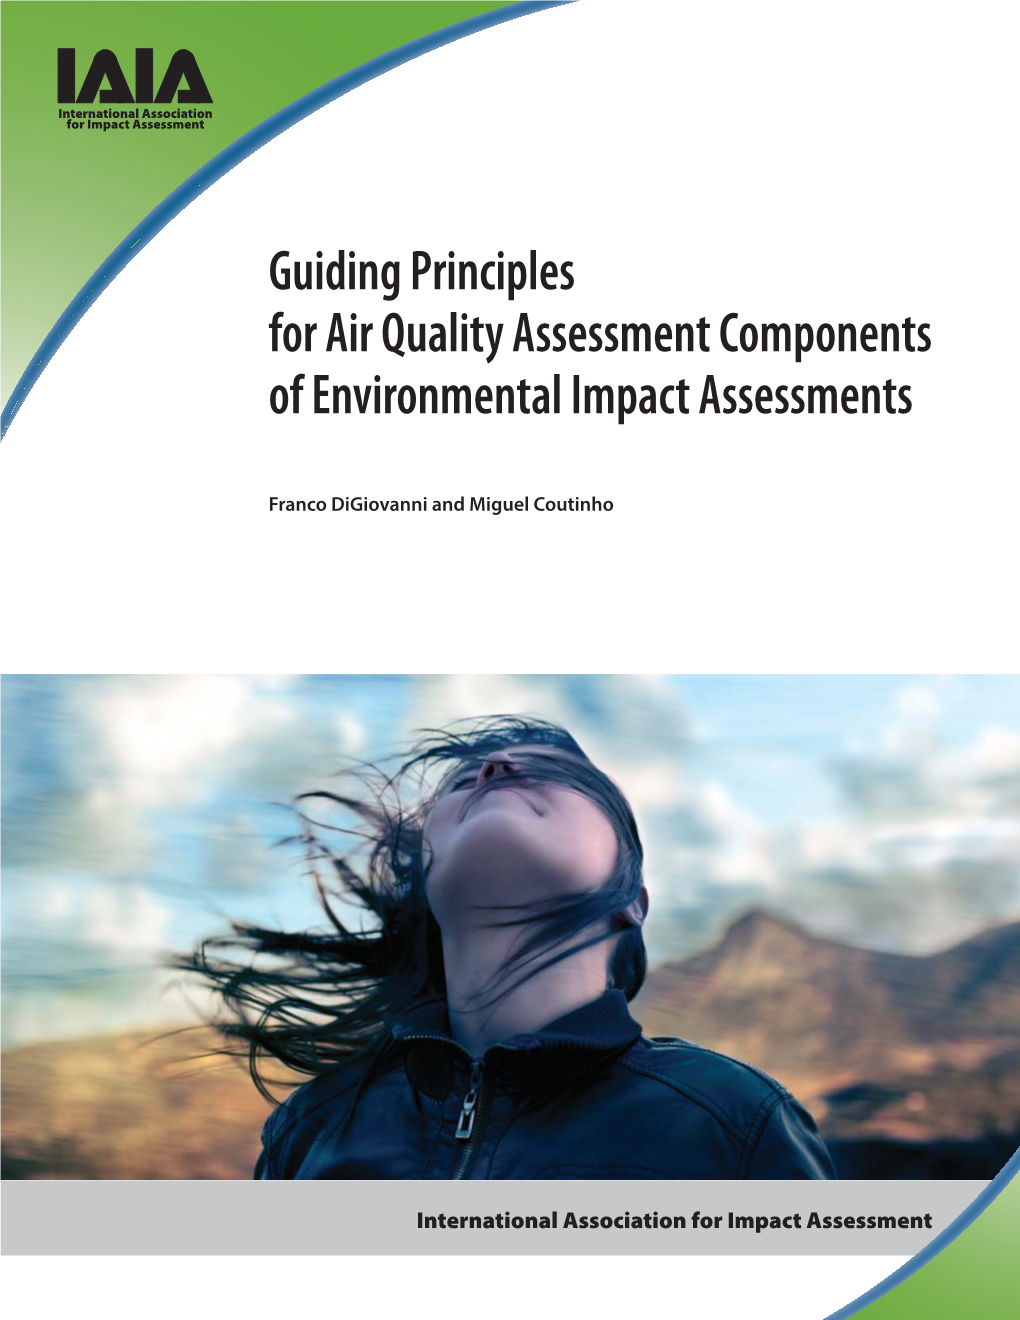 Guiding Principles for Air Quality Assessment Components of Environmental Impact Assessments